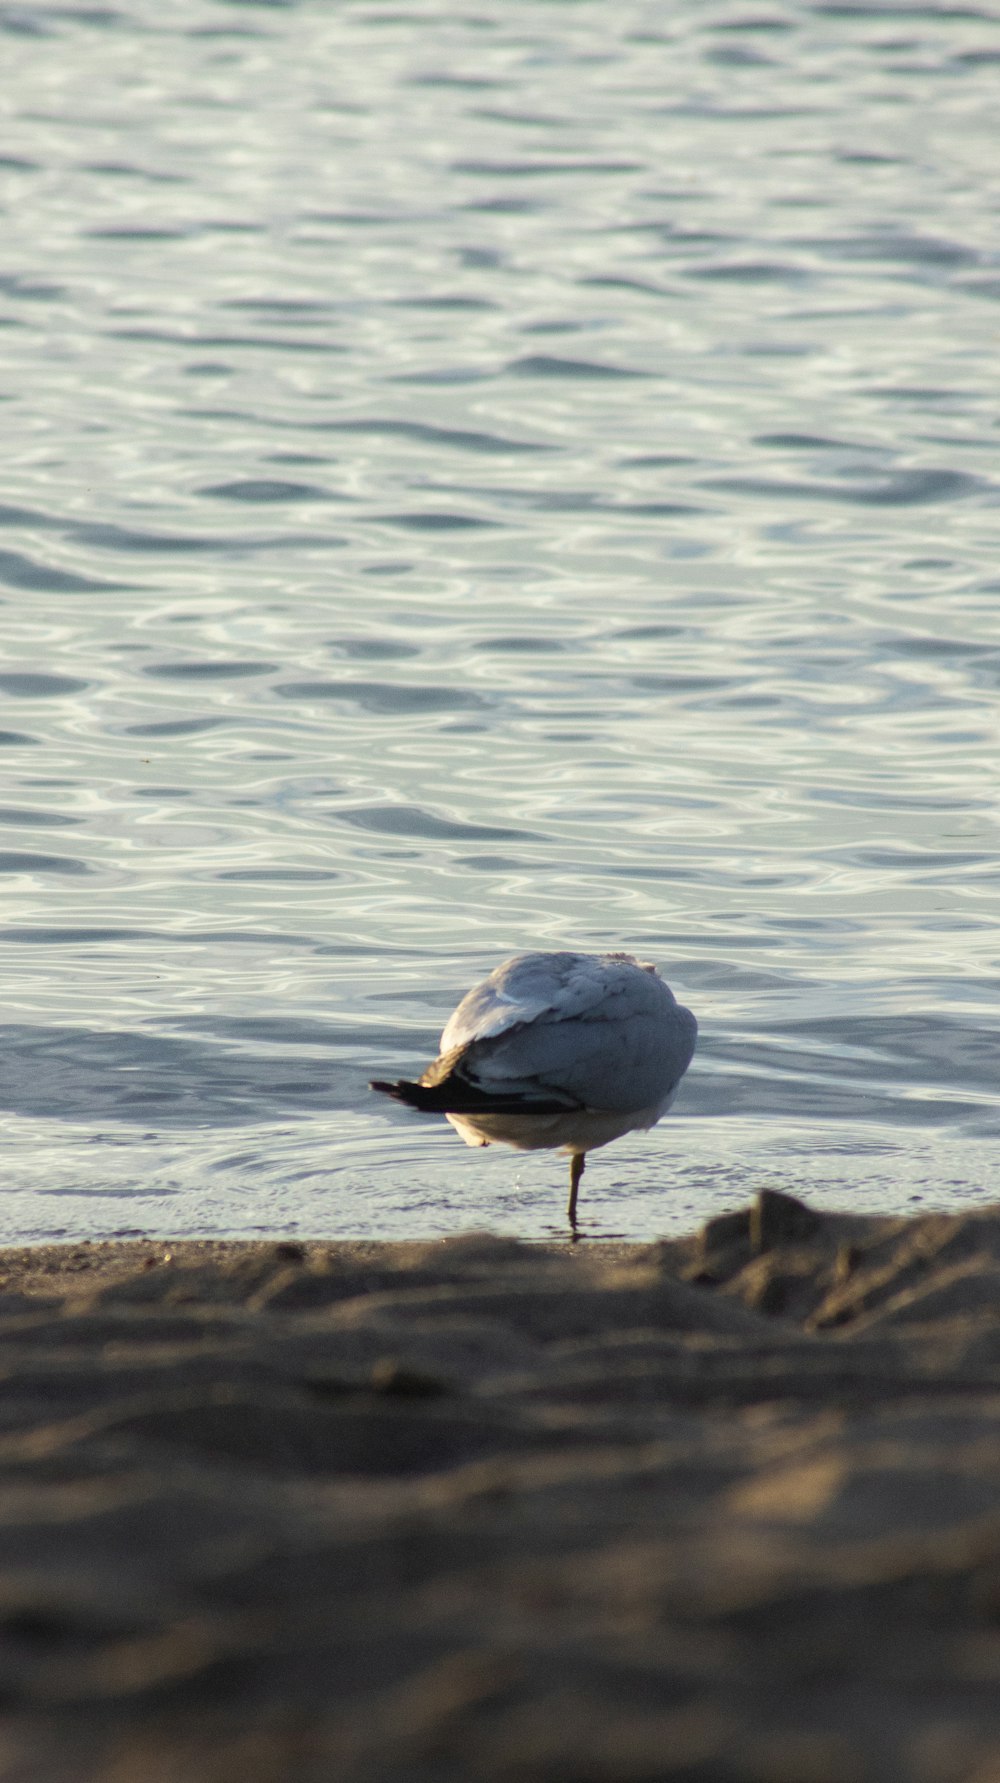 a seagull is standing on the sand near the water